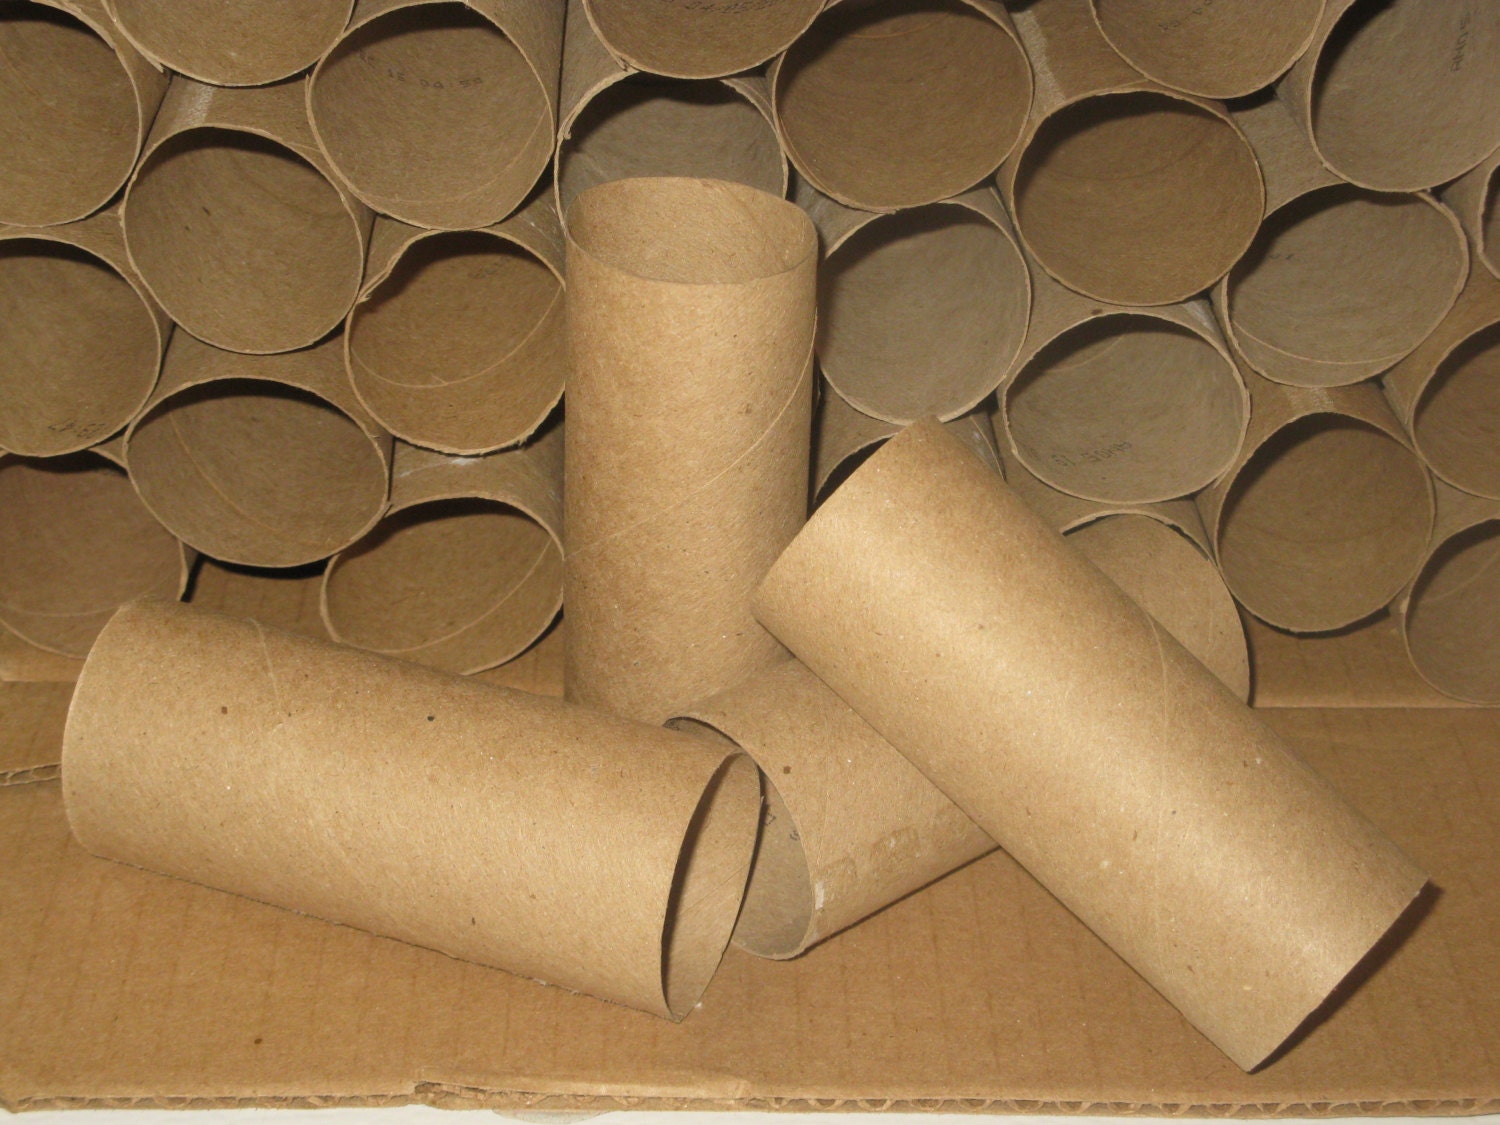 Lot of 25 Toilet Paper Tubes - Clean Cardboard Paper Rolls for Arts & Crafts